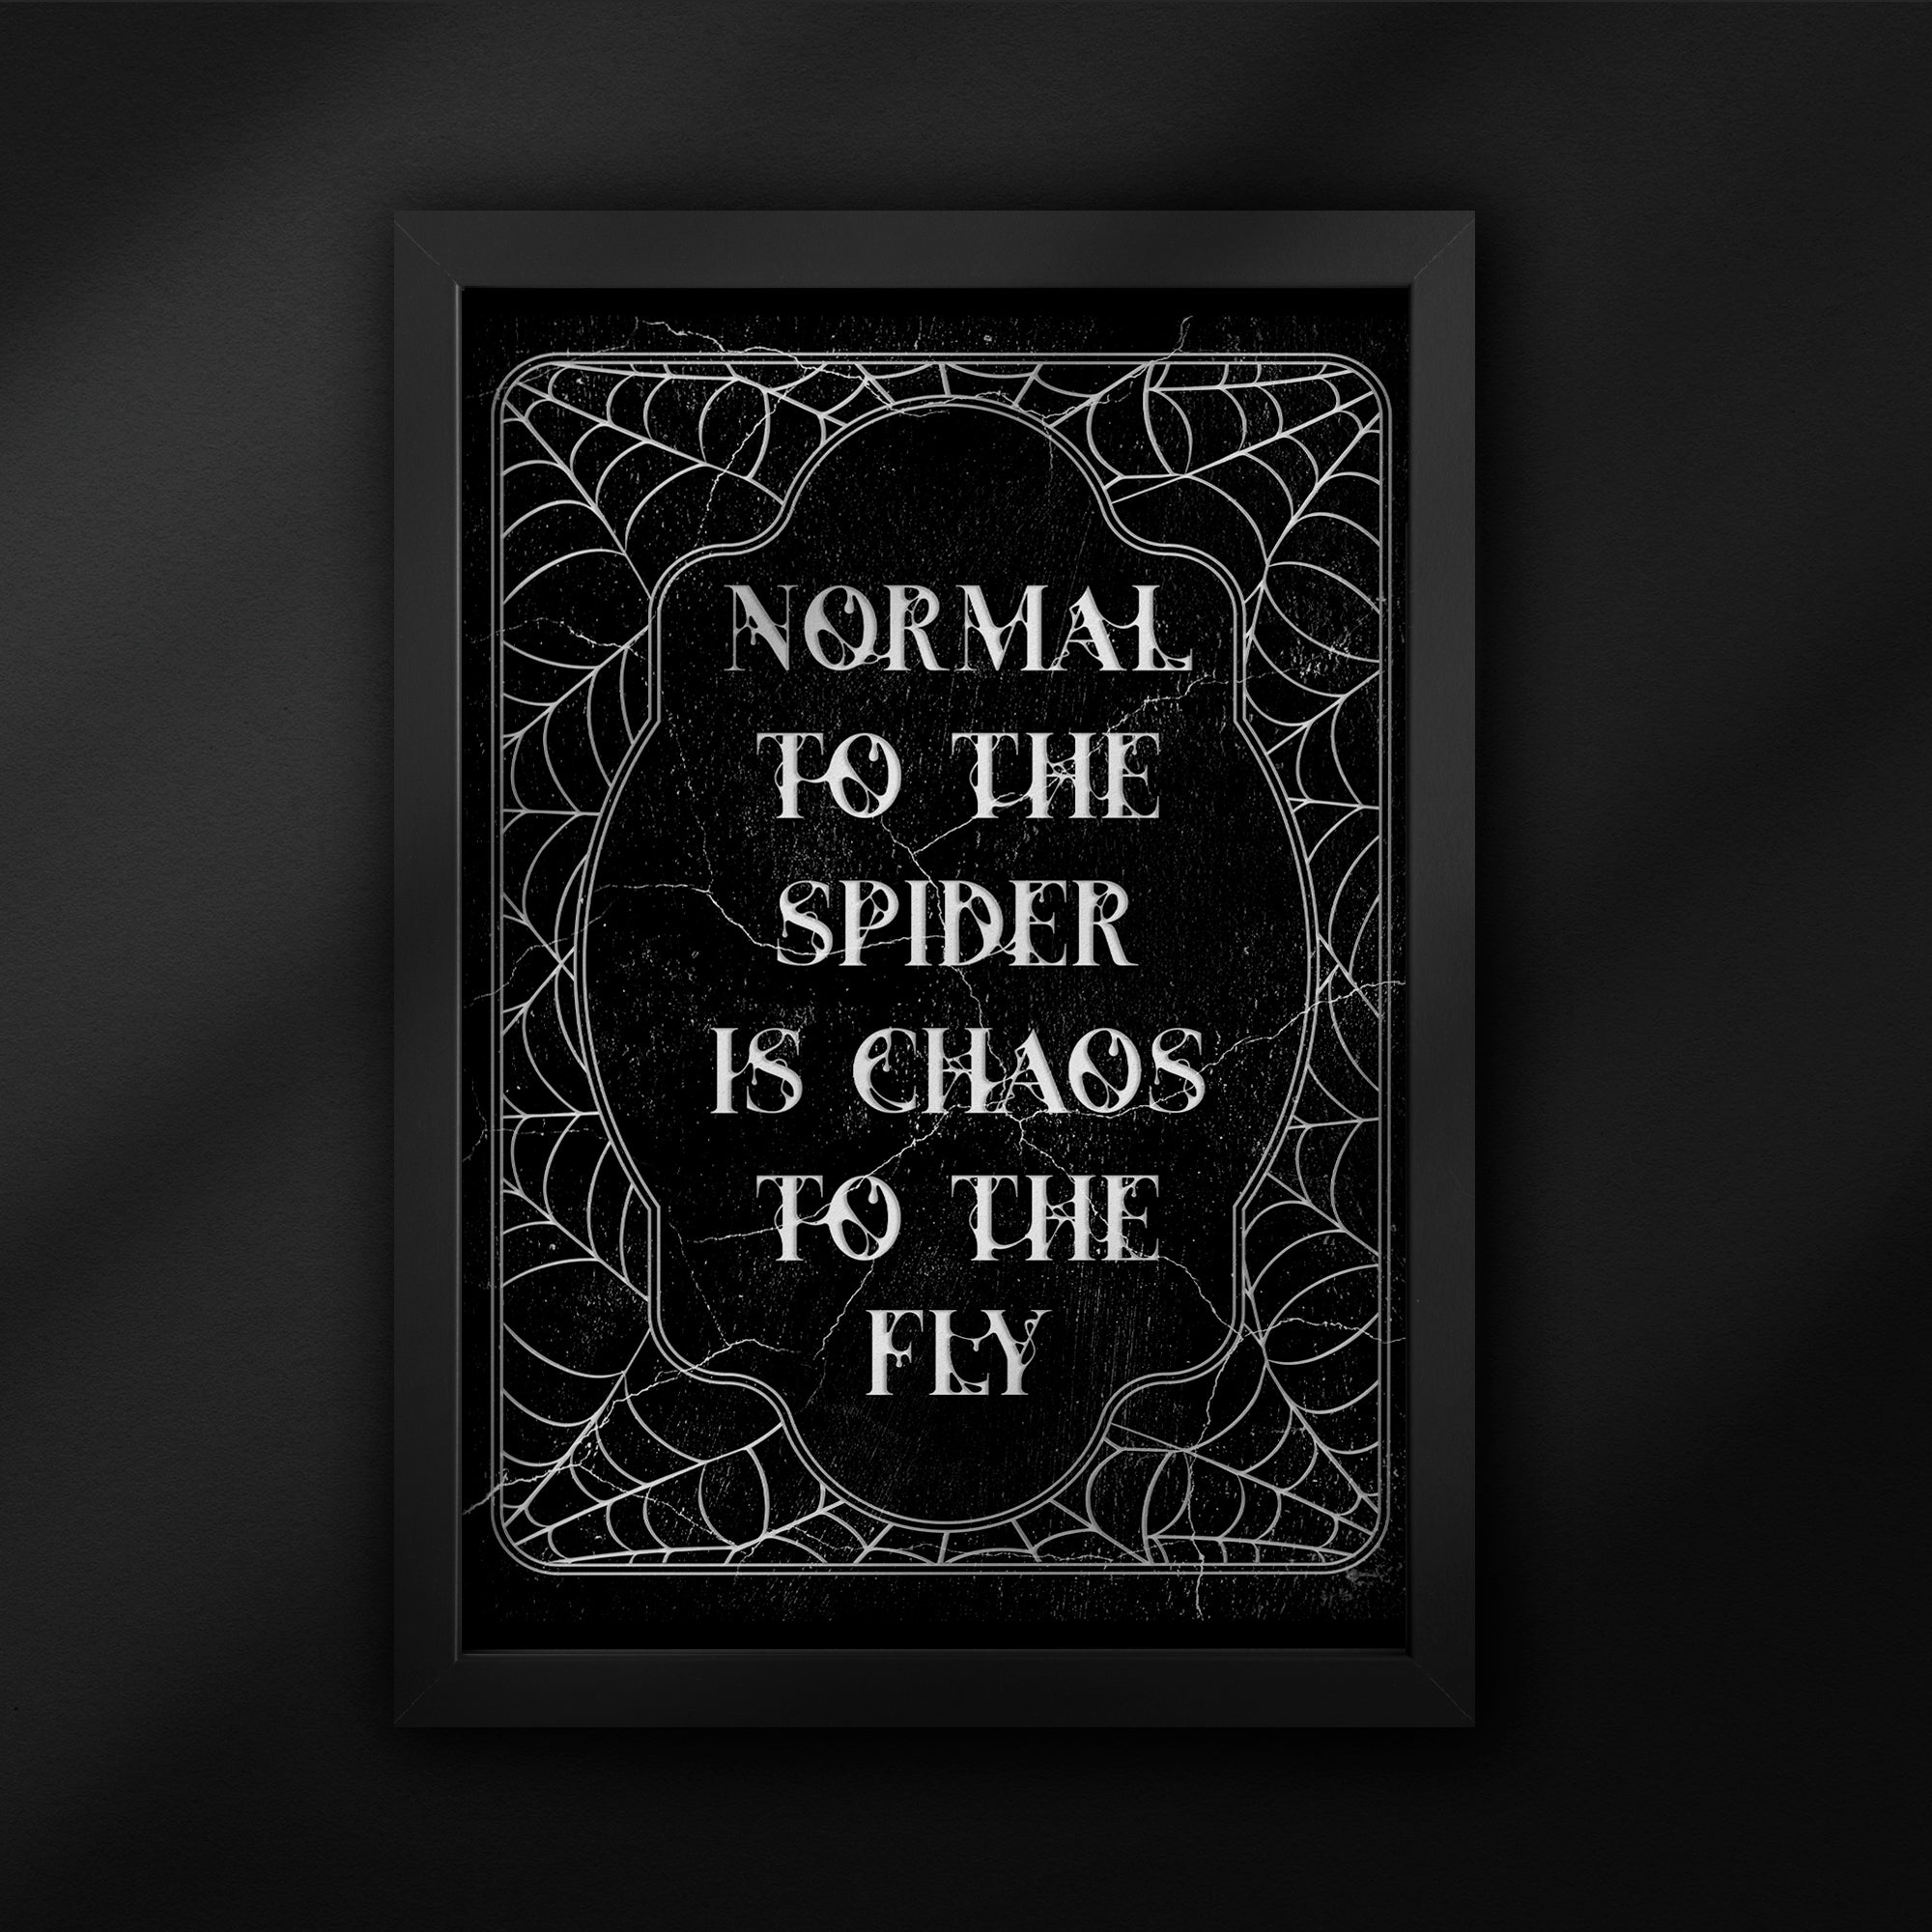 Normal to spider wall art - The Blackened teeth